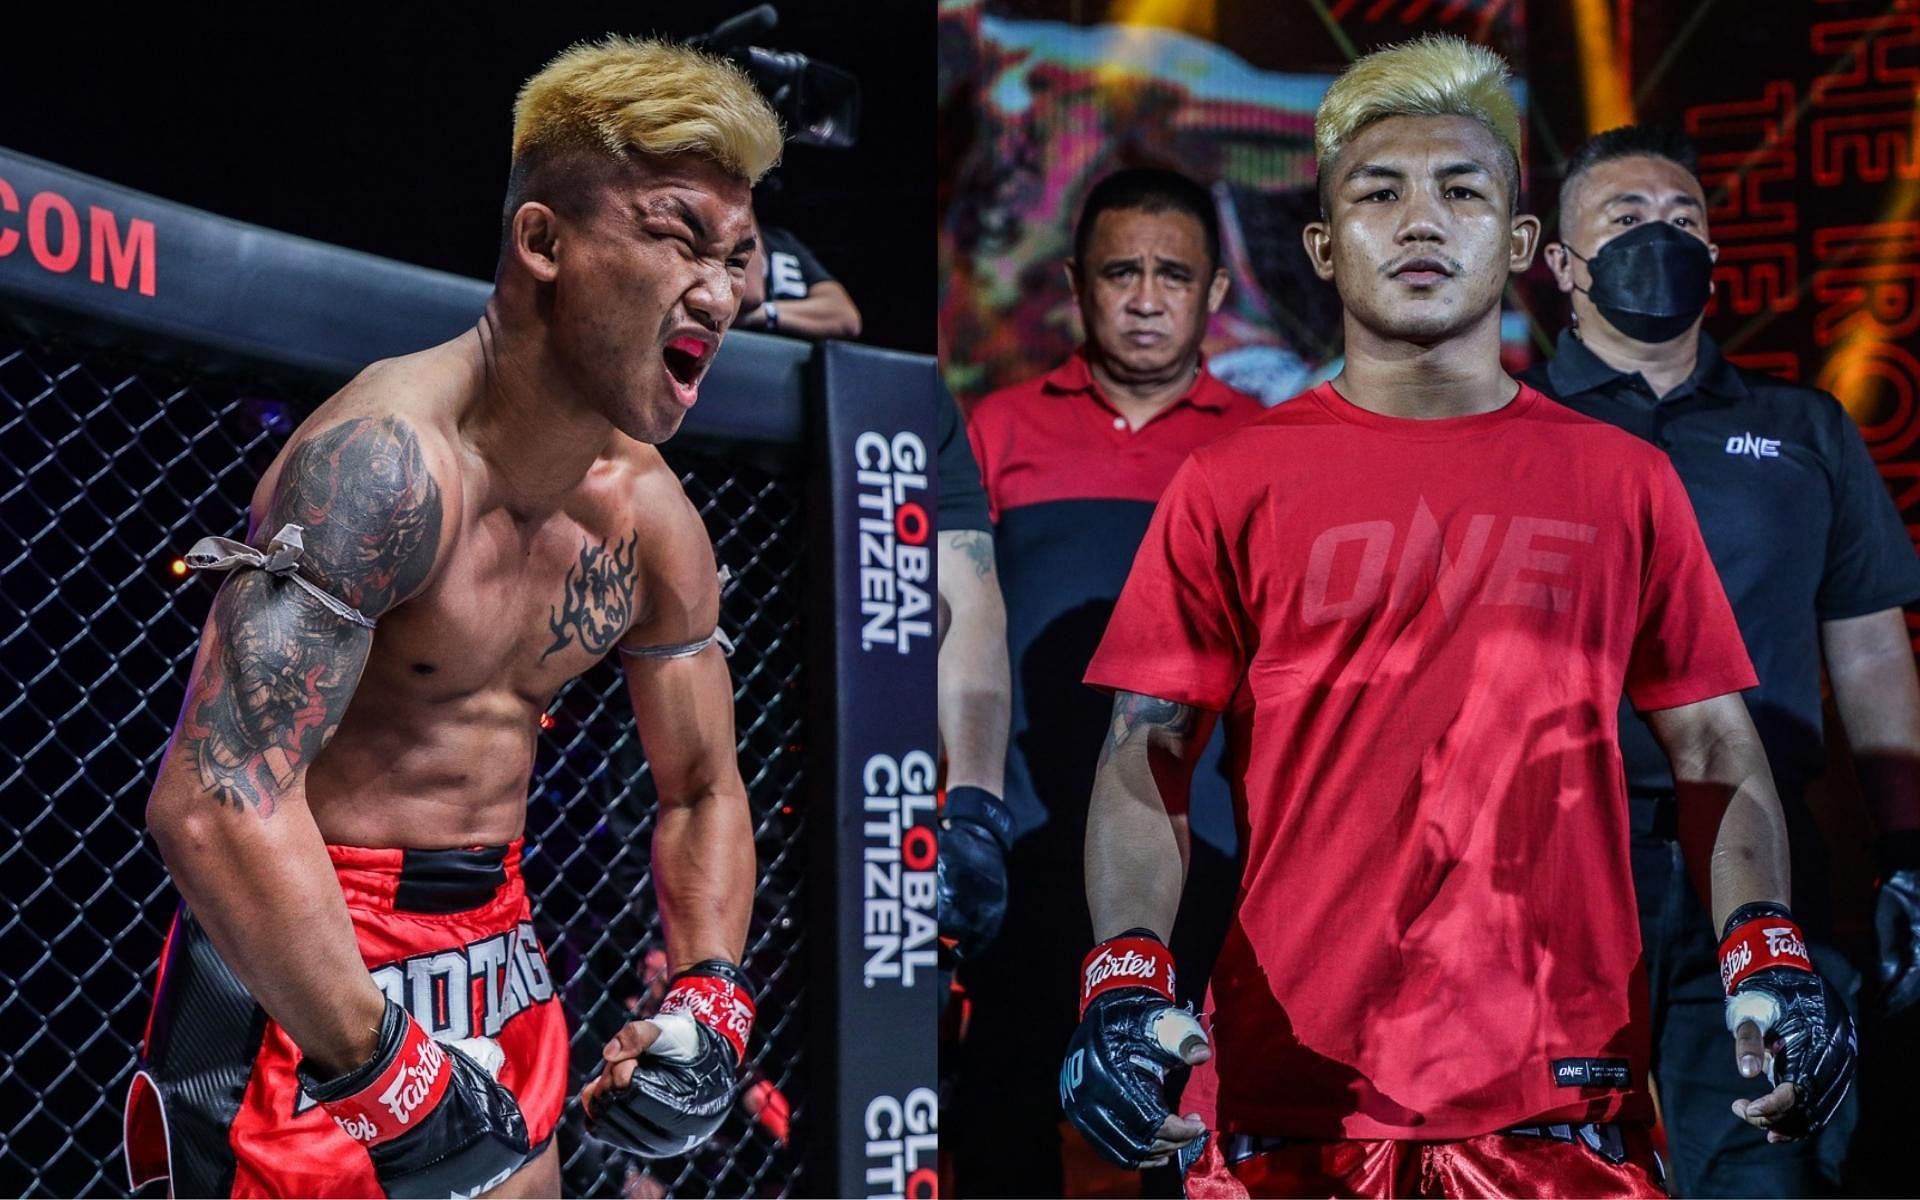 ONE Championship is giving away a signed T-shirt worn by Rodtang Jitmuangnon at ONE 157. (Images courtesy of ONE Championship)